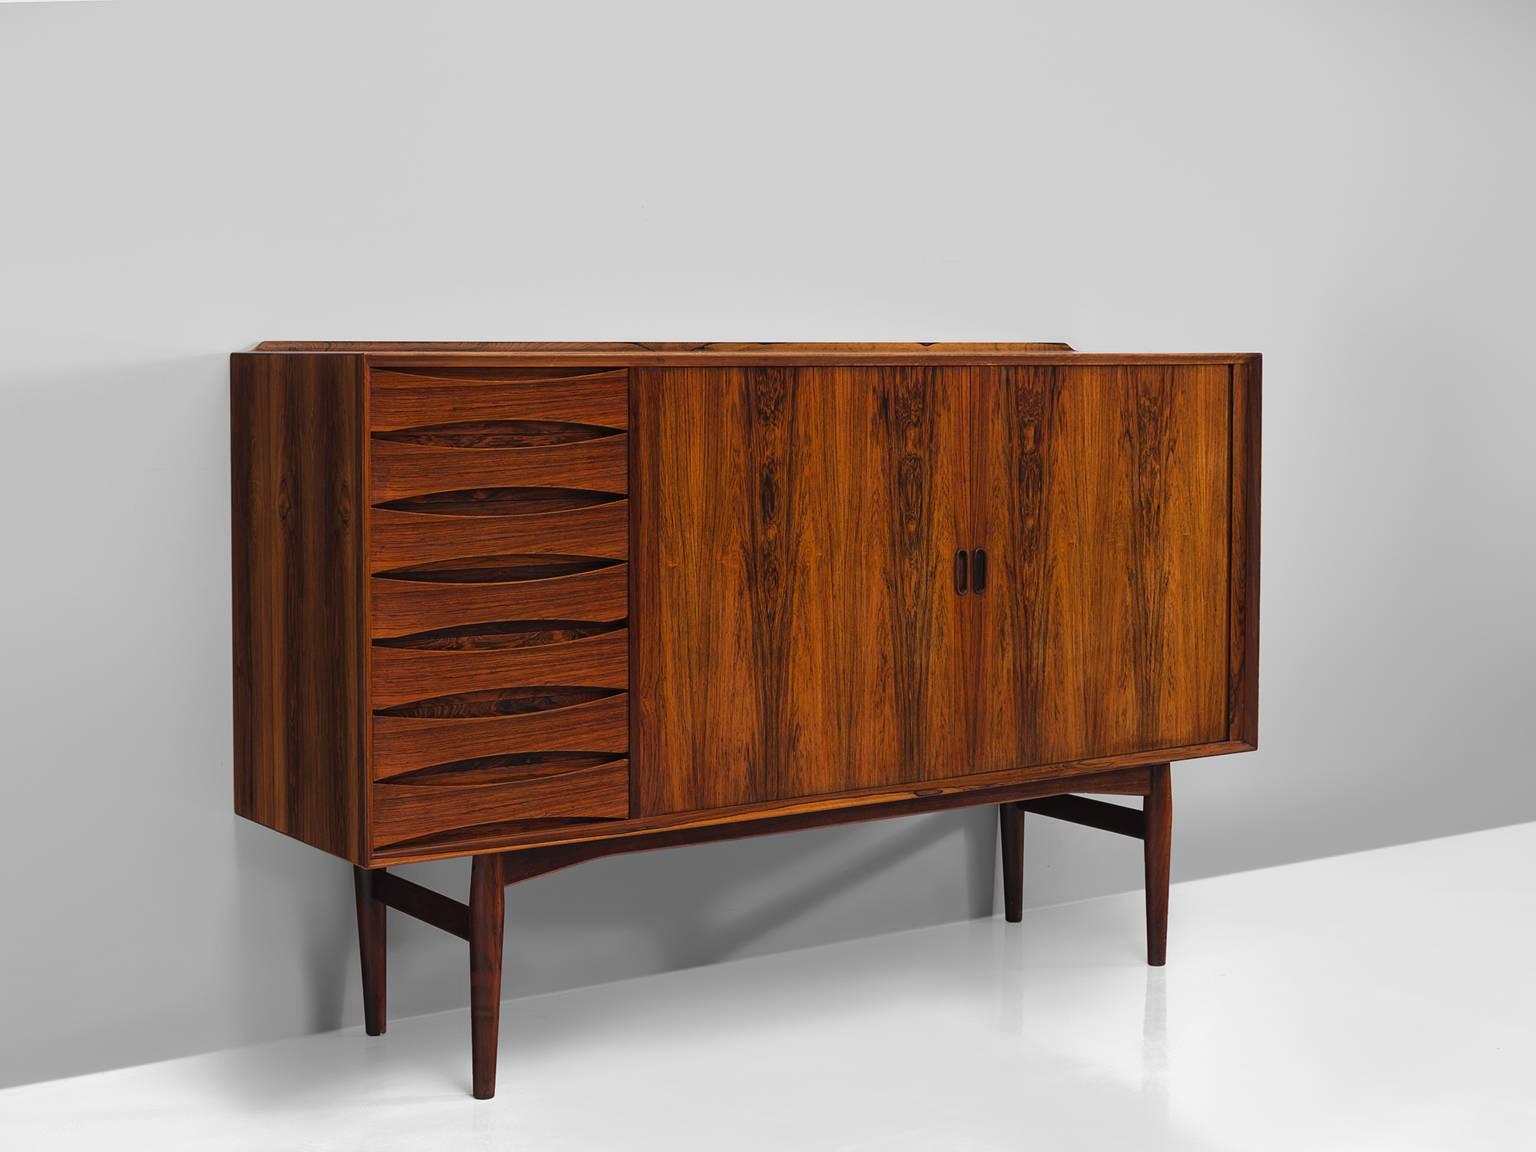 Arne Vodder for Sibast furniture, cabinet, rosewood, Denmark, 1960s.

This small rosewood sideboard is designed by Arne Vodder and is an iconic example of Danish midcentury furniture both in finish, aesthetics and use of material. The main features